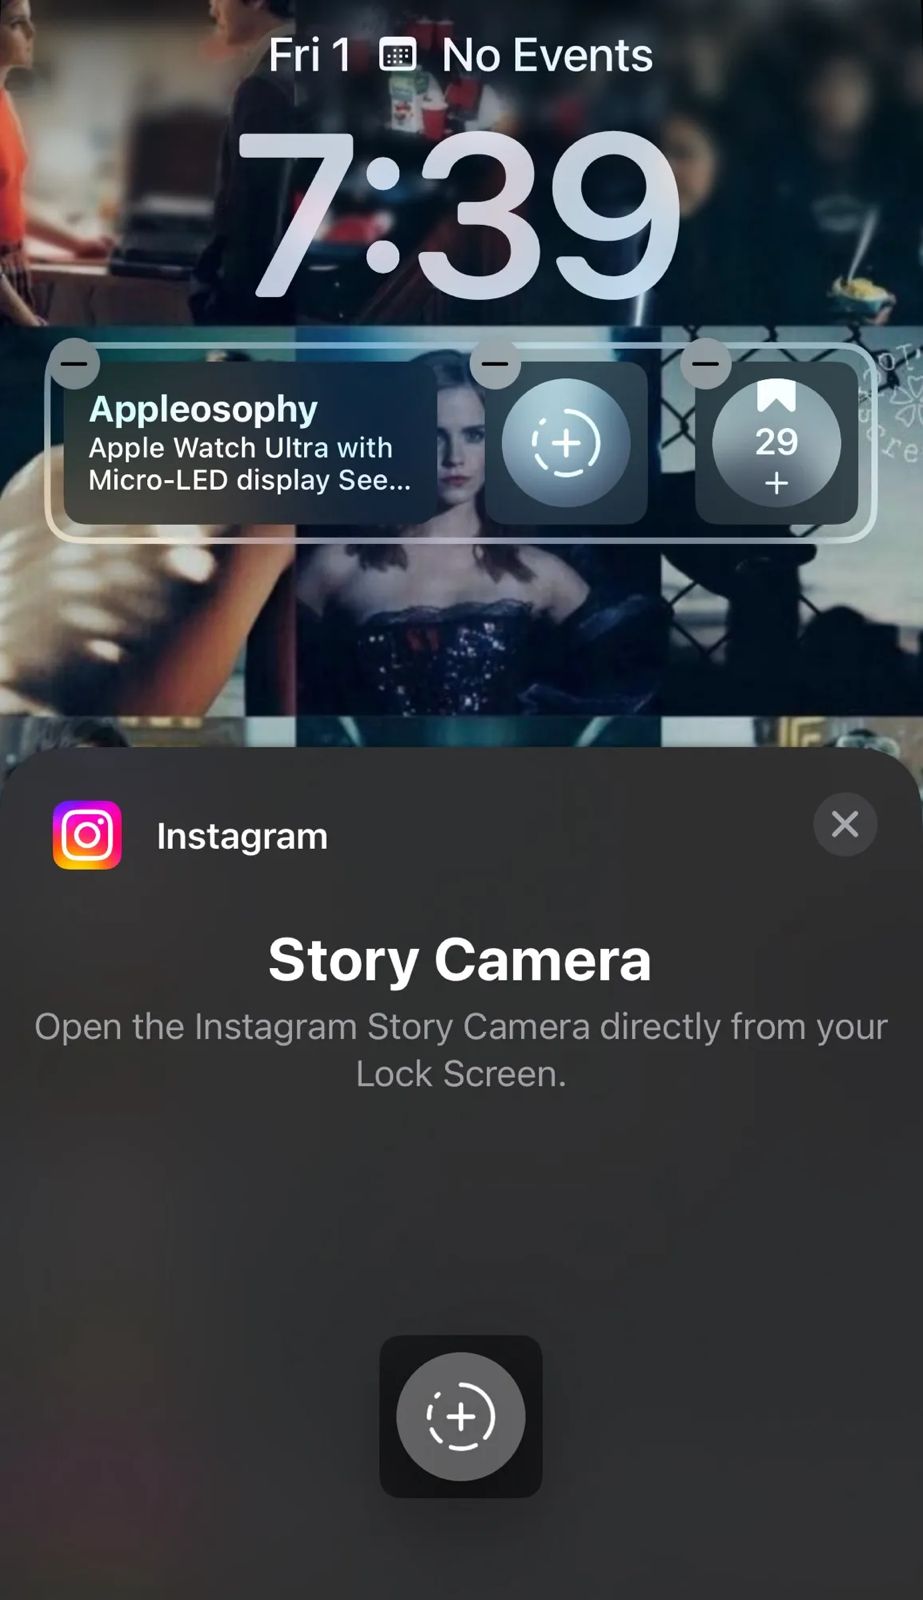 Feature requires iOS 16 and the latest Instagram app version for optimal use